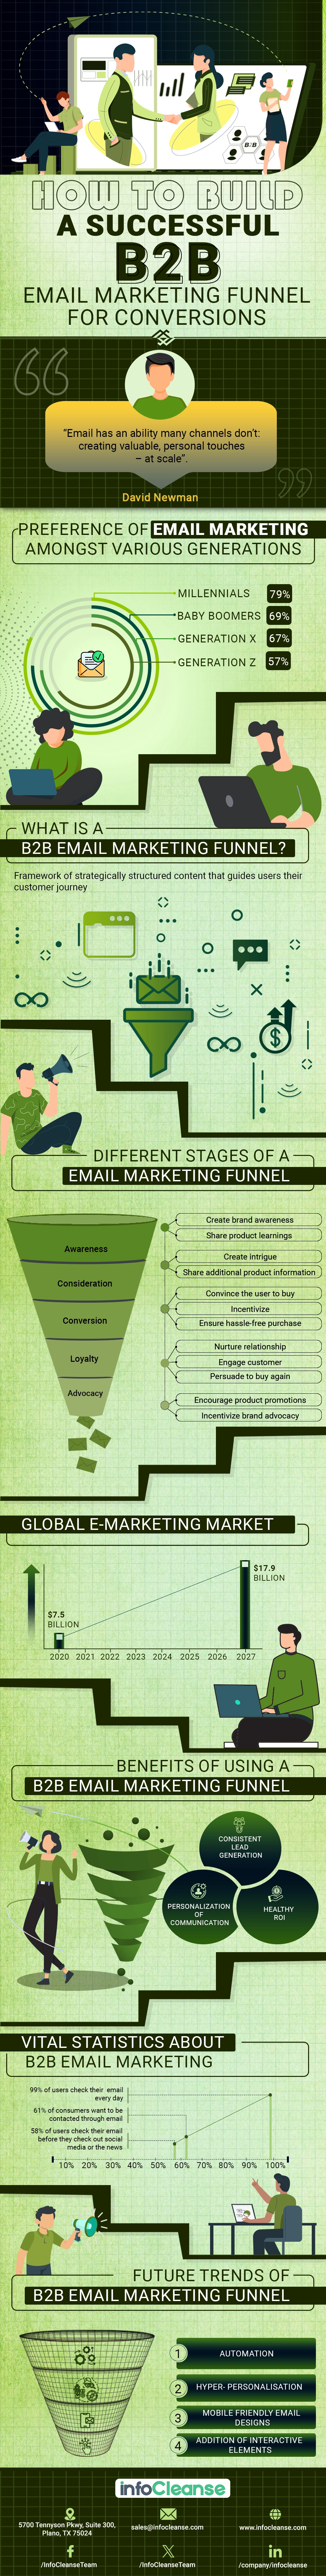 How to build a successful B2B Email Marketing Funnel for Conversions - Infographic